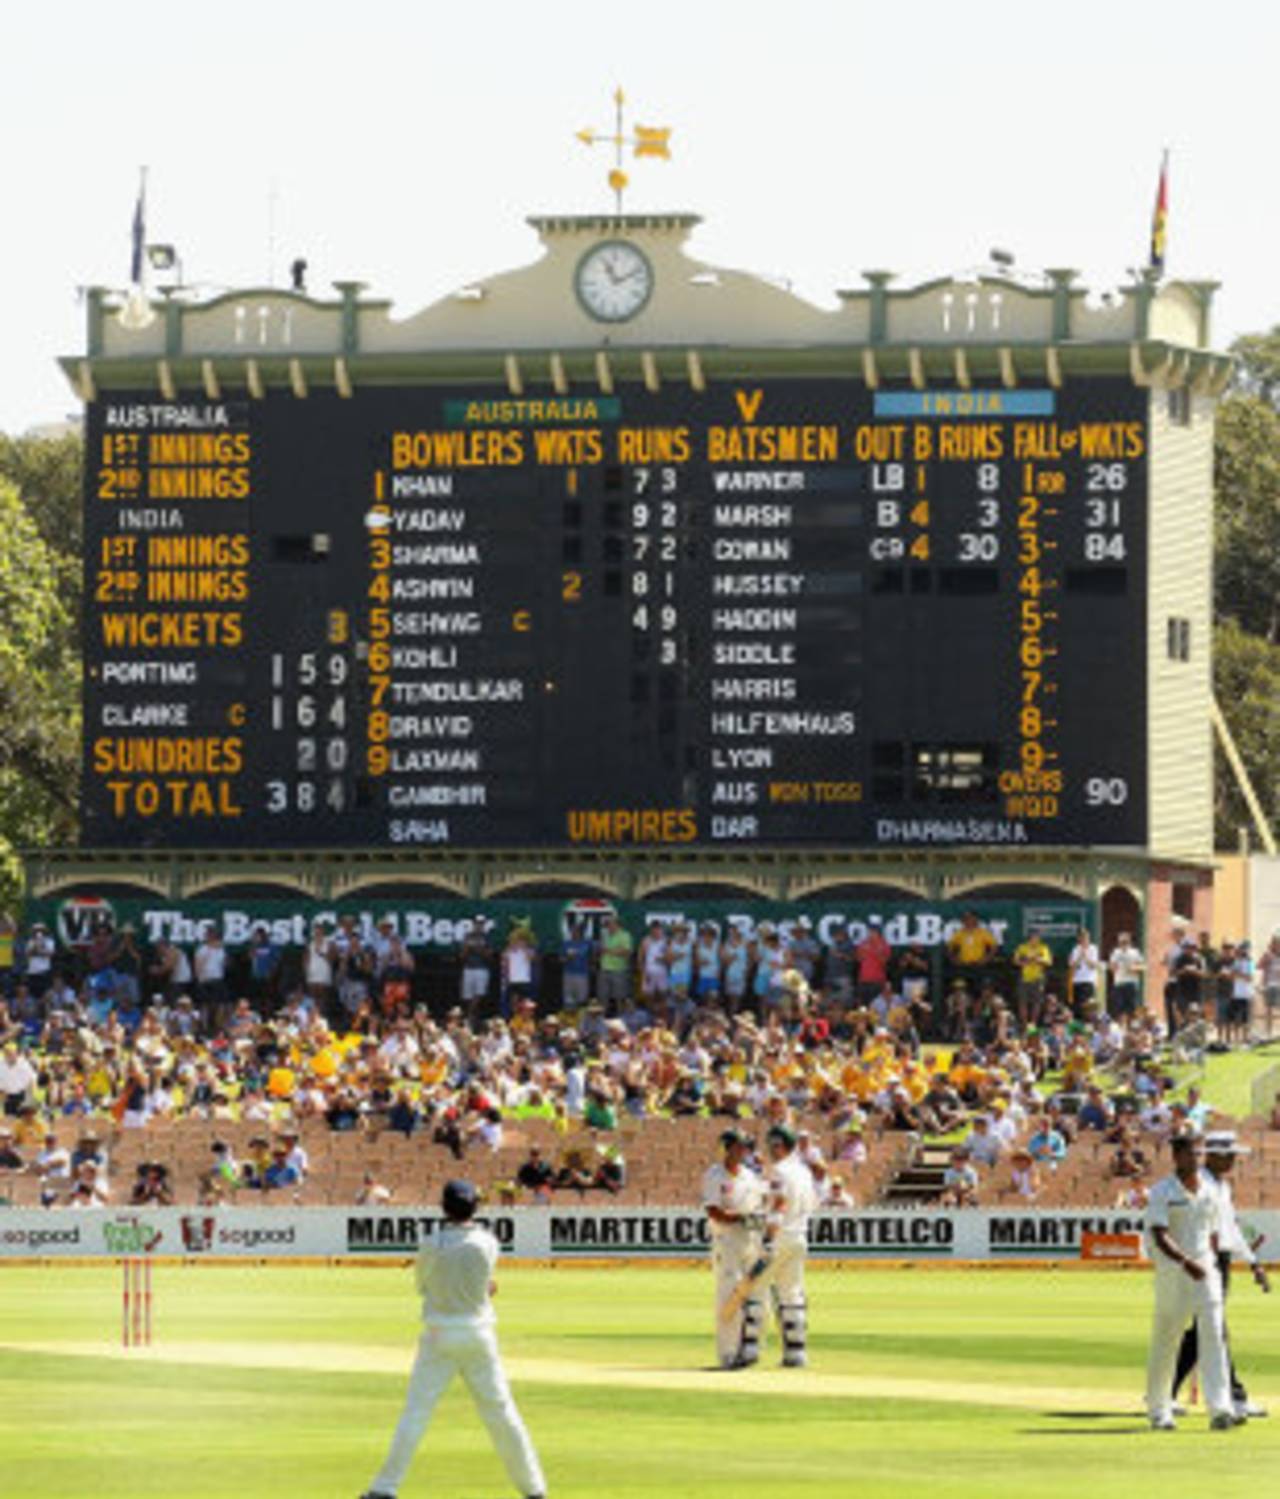 The old scoreboard at the Adelaide Oval, Australia v India, 4th Test, Adelaide, 2nd day, January 25, 2012